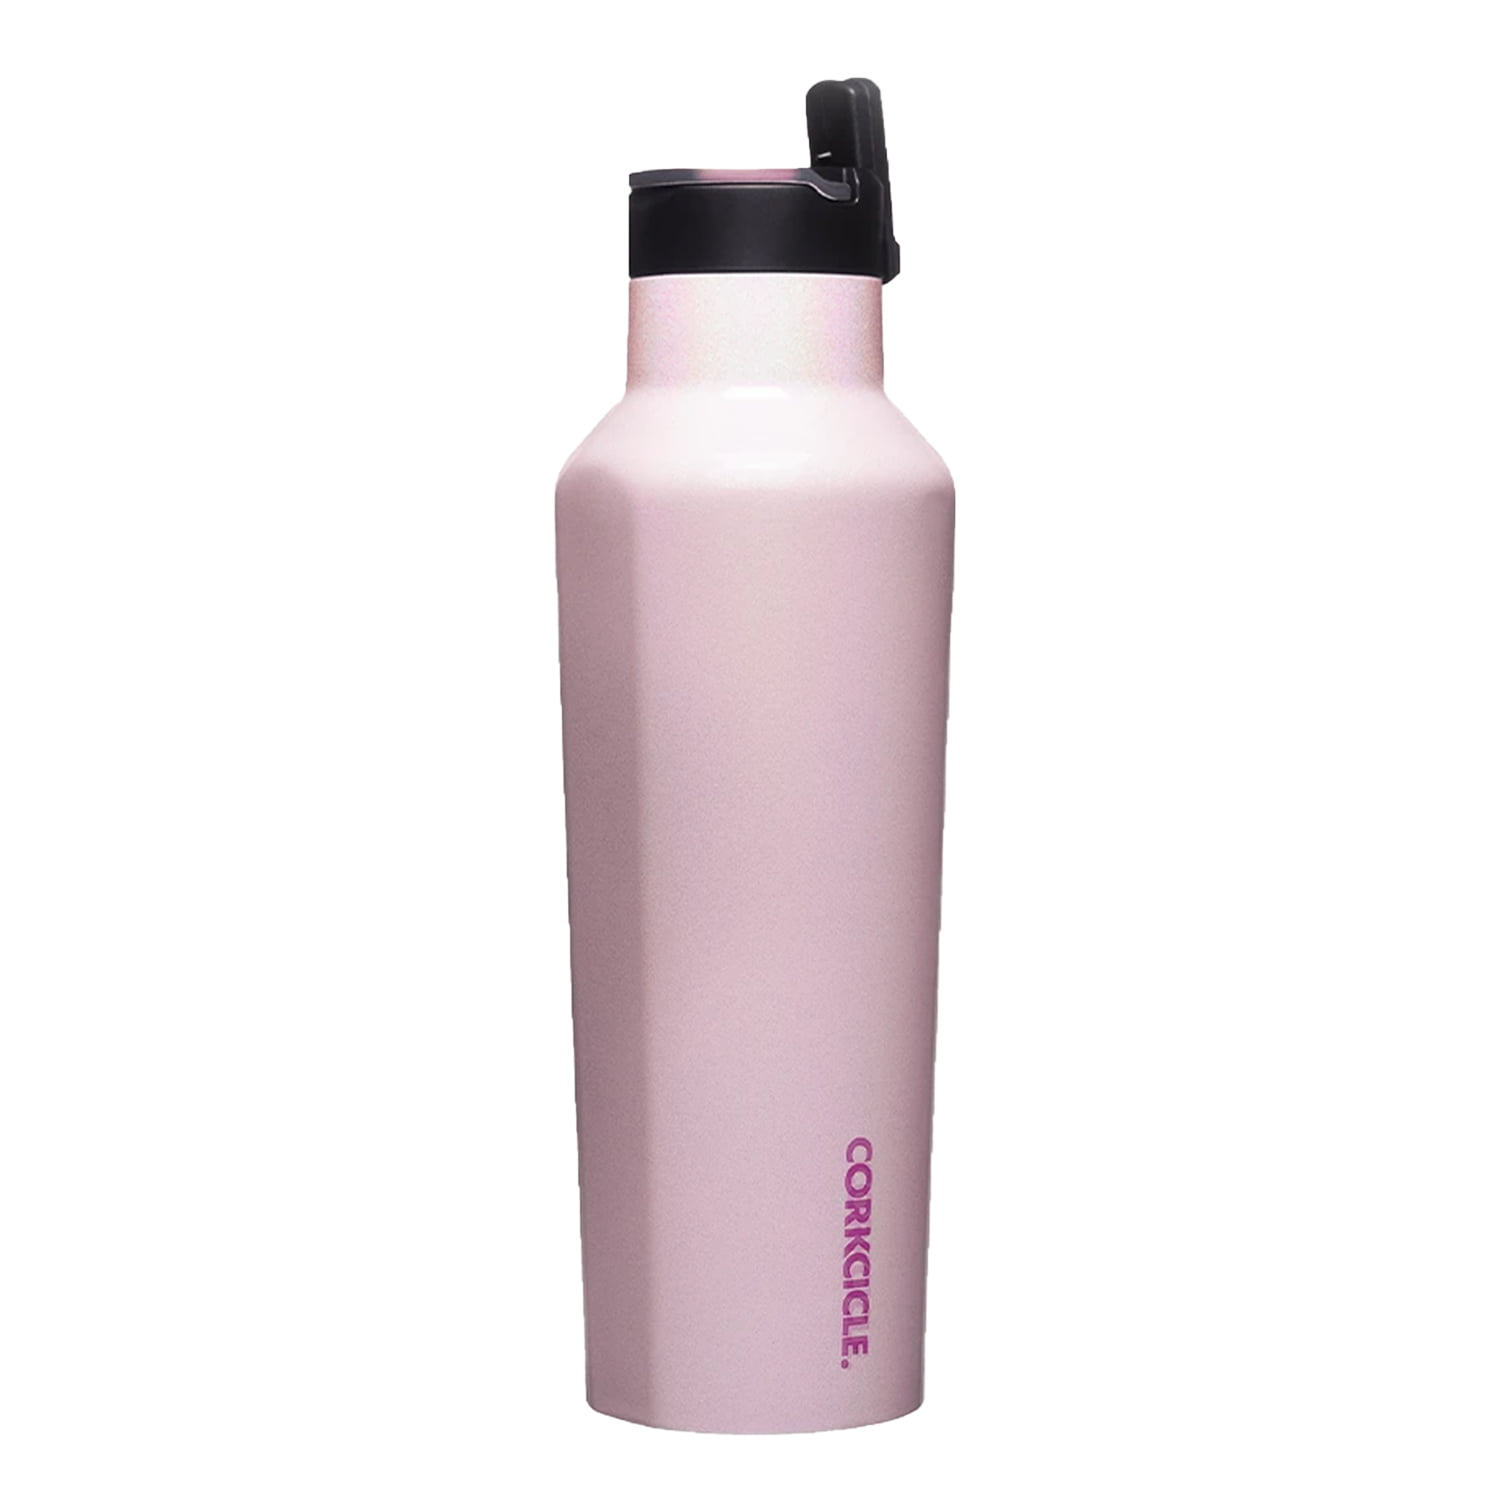 Corkcicle Canteen Insulated Water Bottle Flask Camping 25oz Brushed Steel NEW 